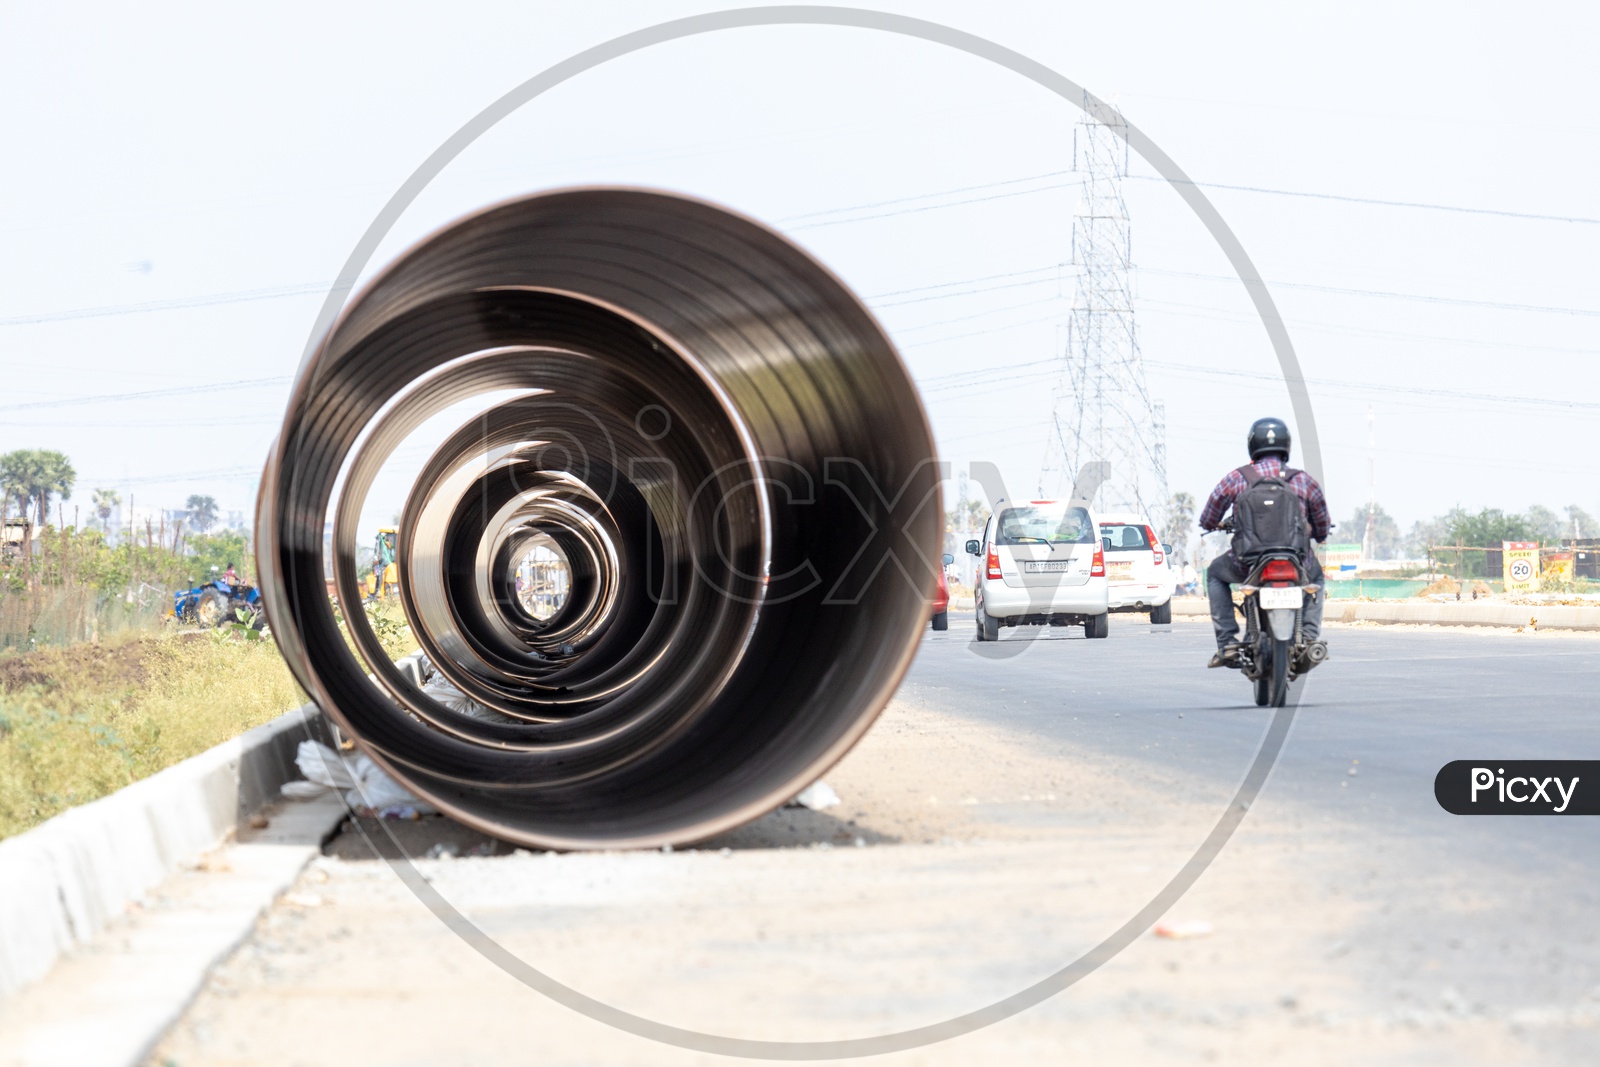 Large Diameter Underground Pipes On Road Side